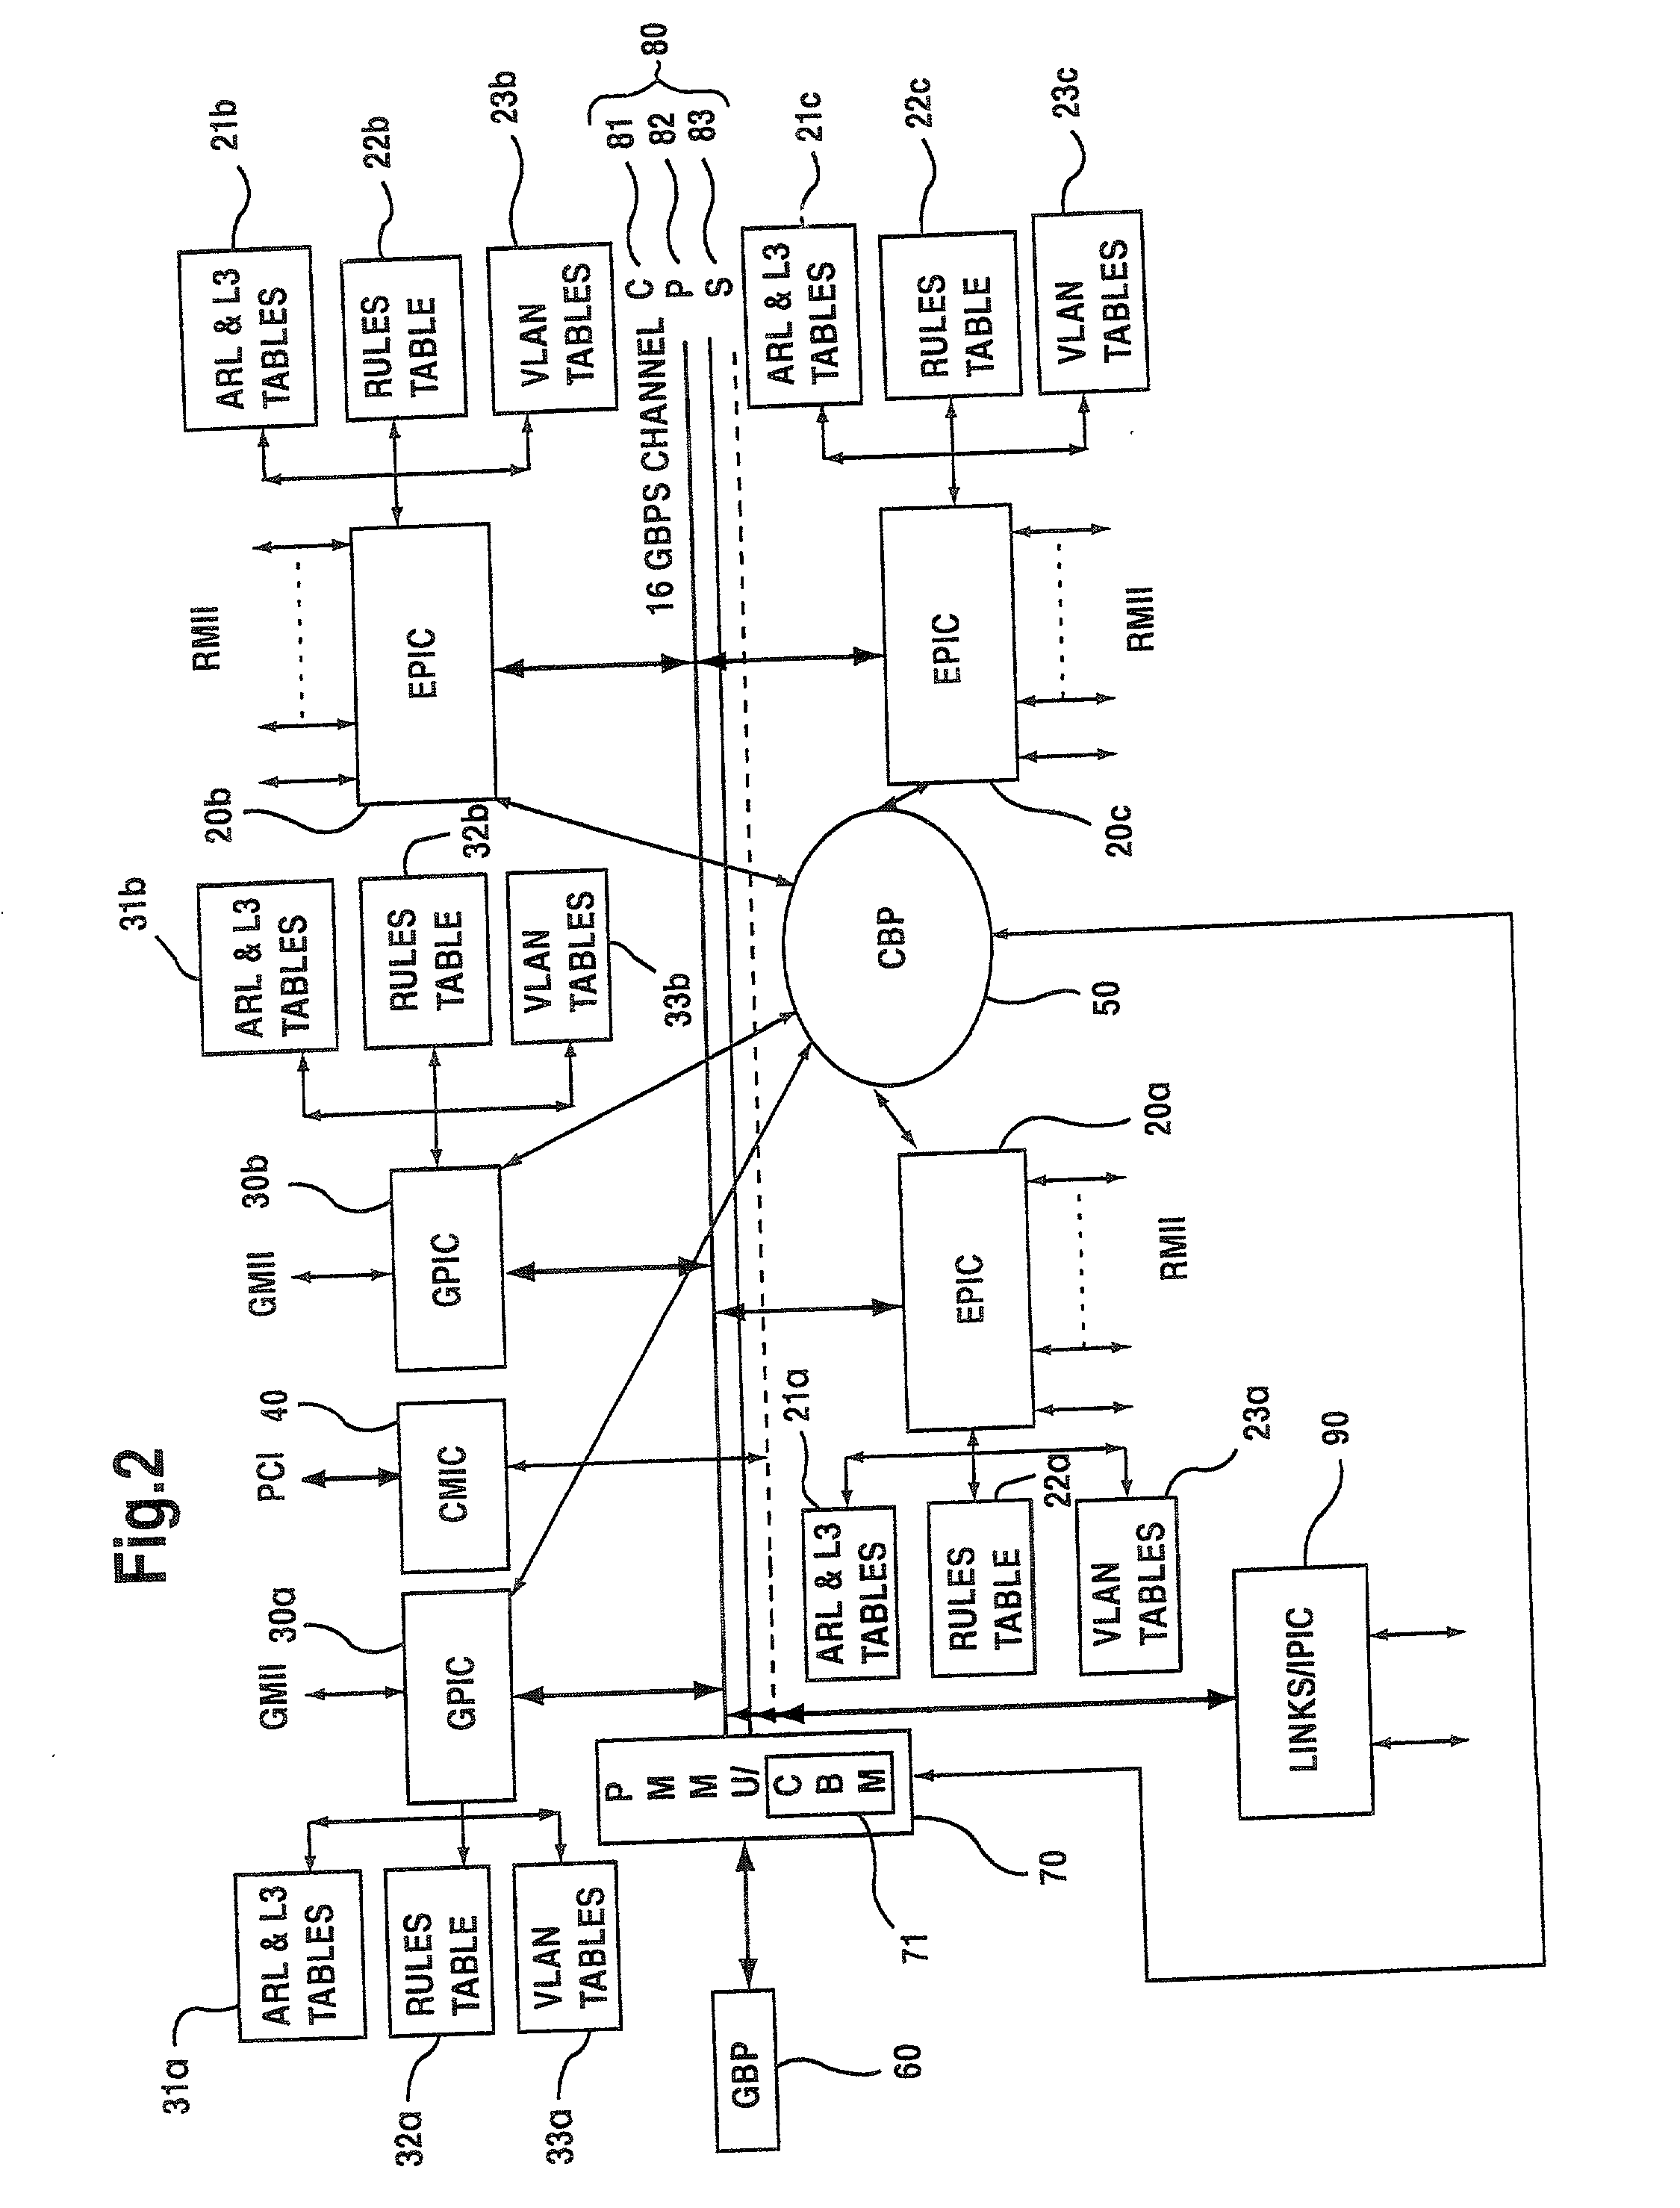 Network switching architecture with fast filtering processor